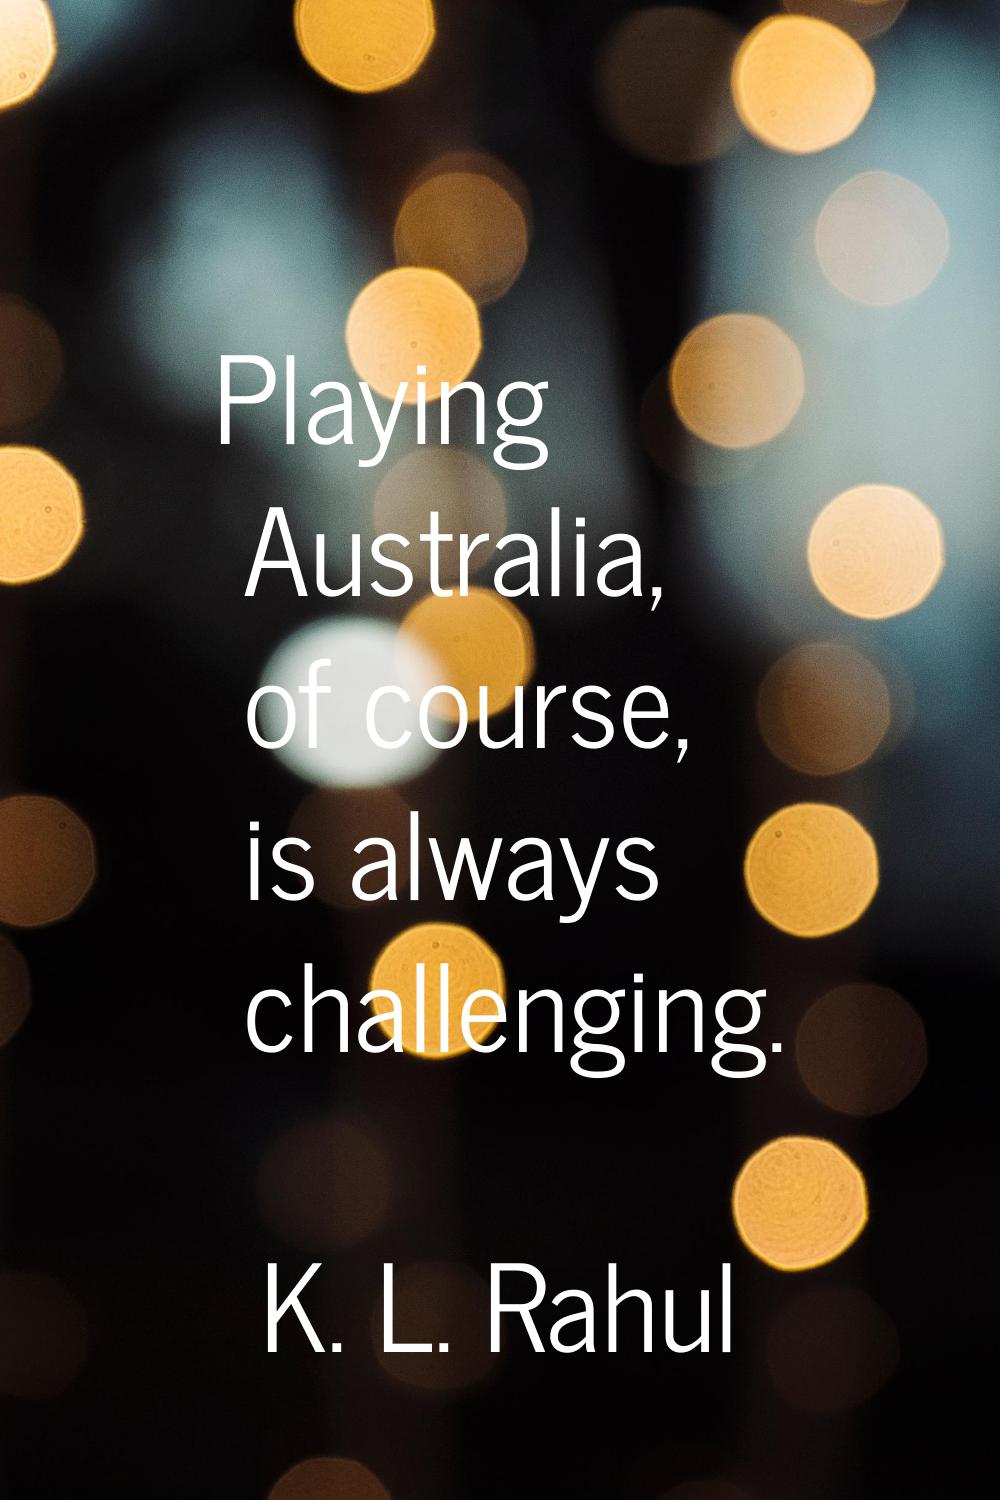 Playing Australia, of course, is always challenging.